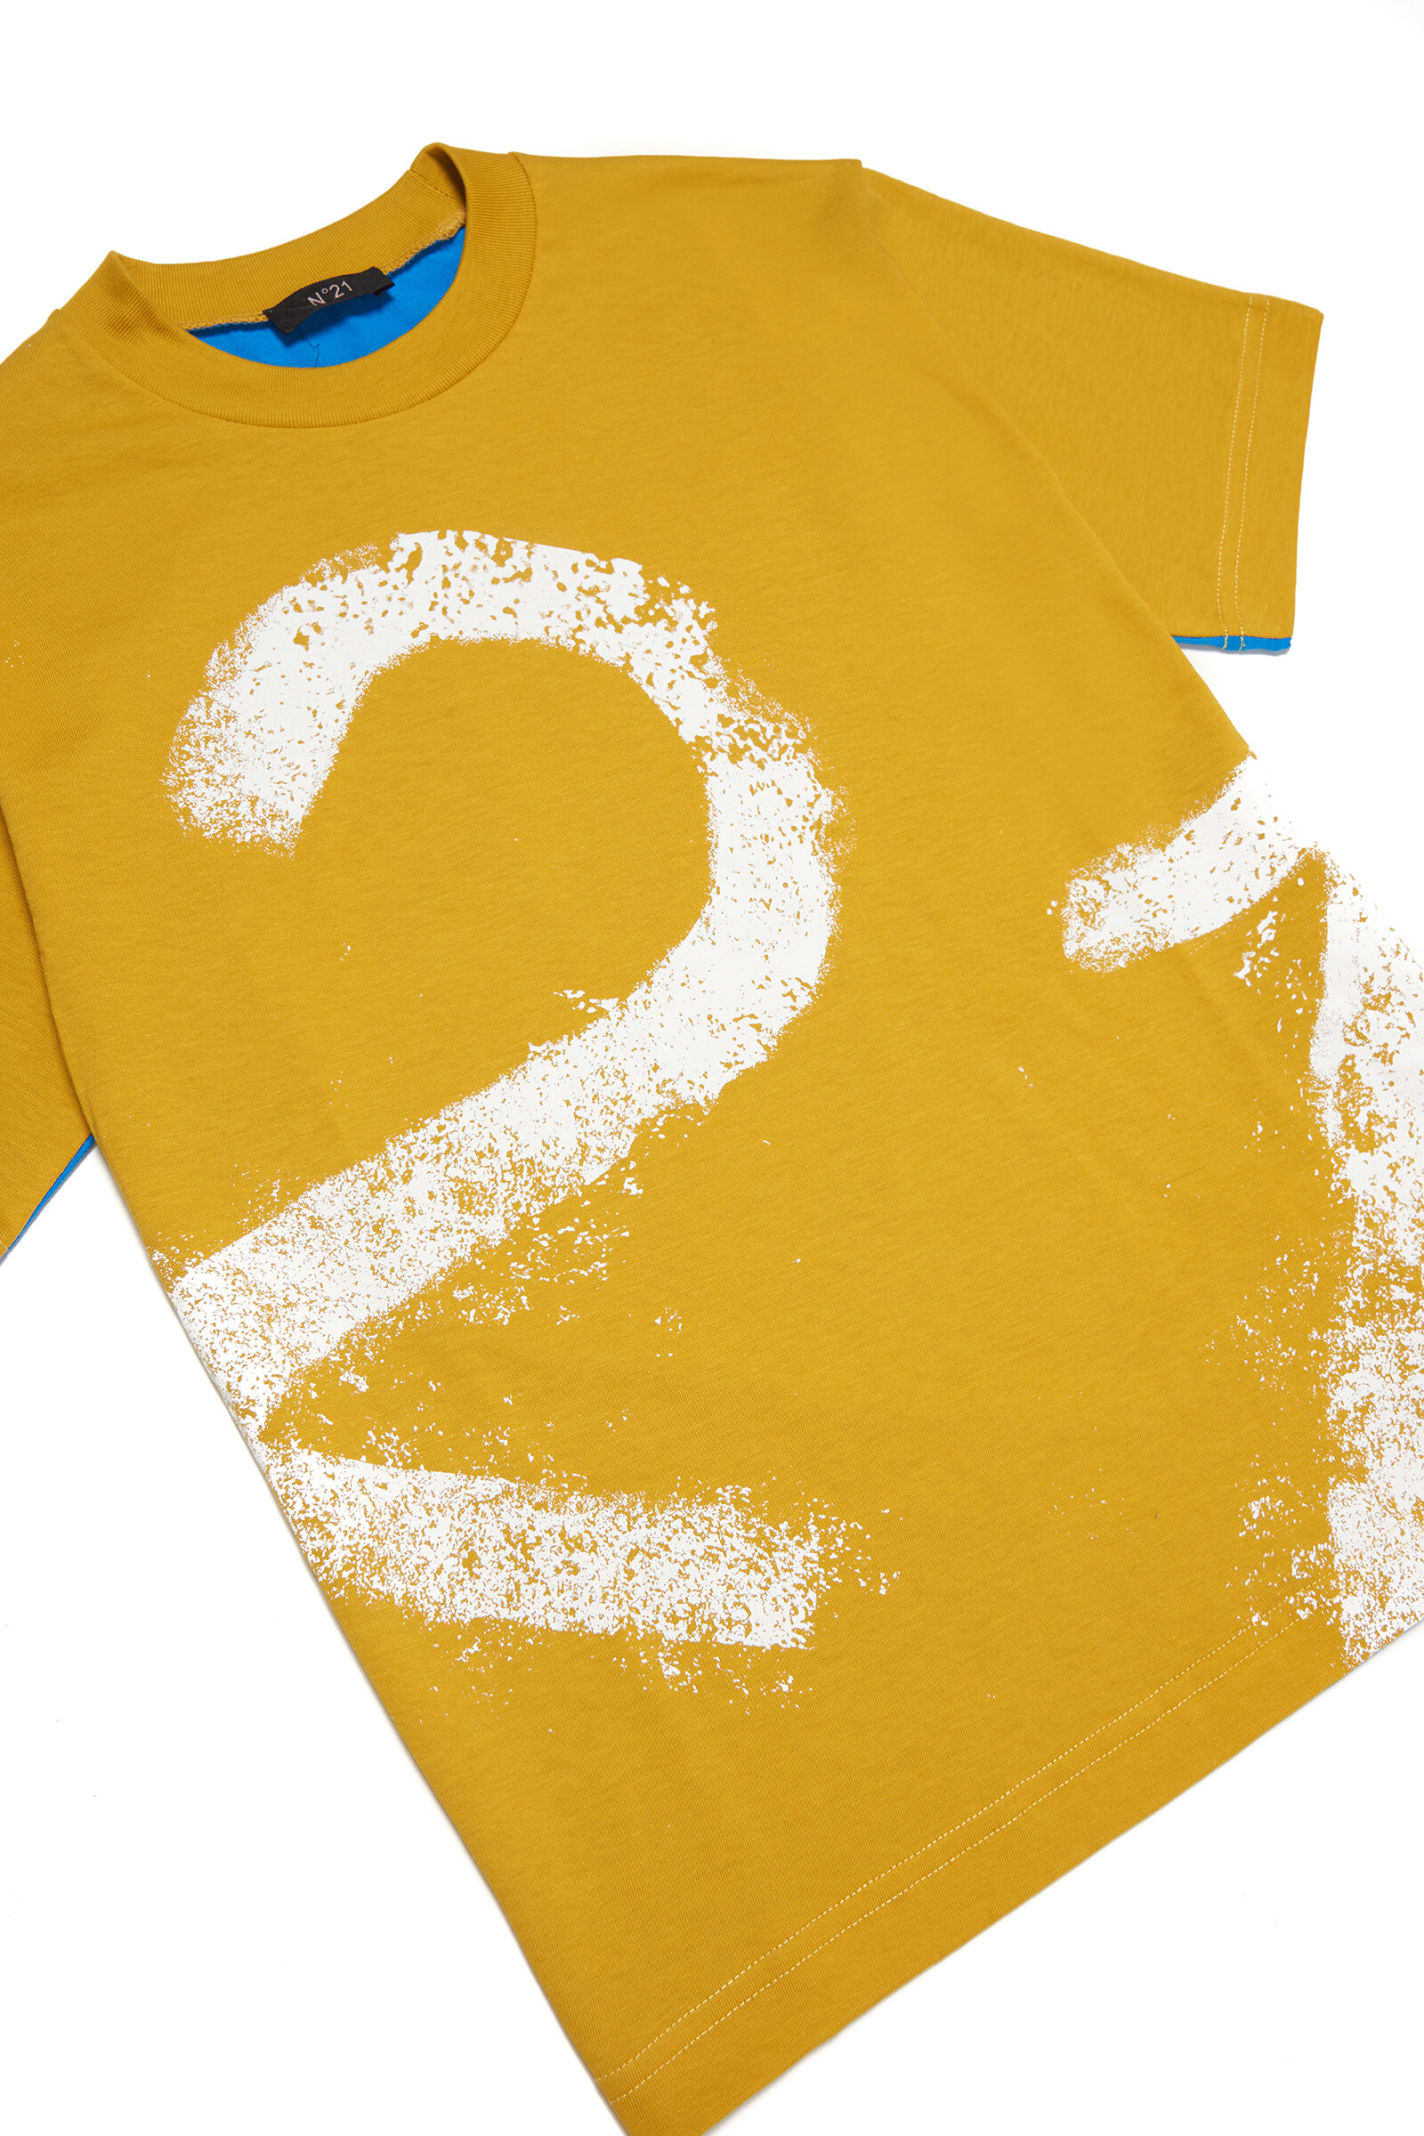 N°21 yellow and light blue two-tone jersey t-shirt with vintage effect logo  for children